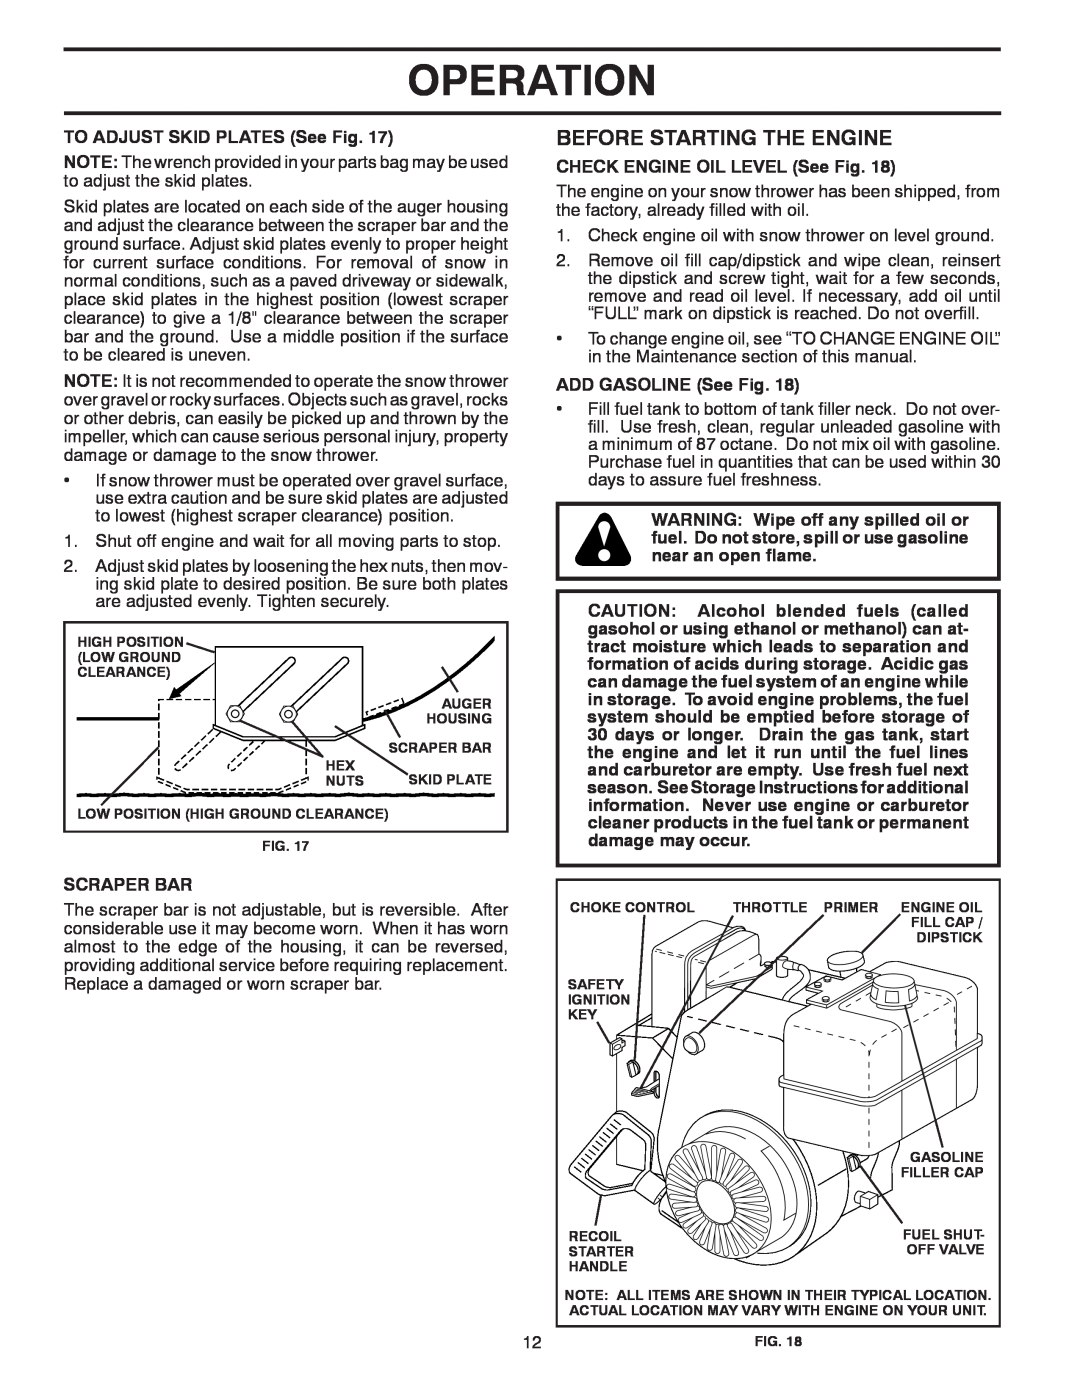 Poulan 414639 Before Starting The Engine, Operation, TO ADJUST SKID PLATES See Fig, CHECK ENGINE OIL LEVEL See Fig 